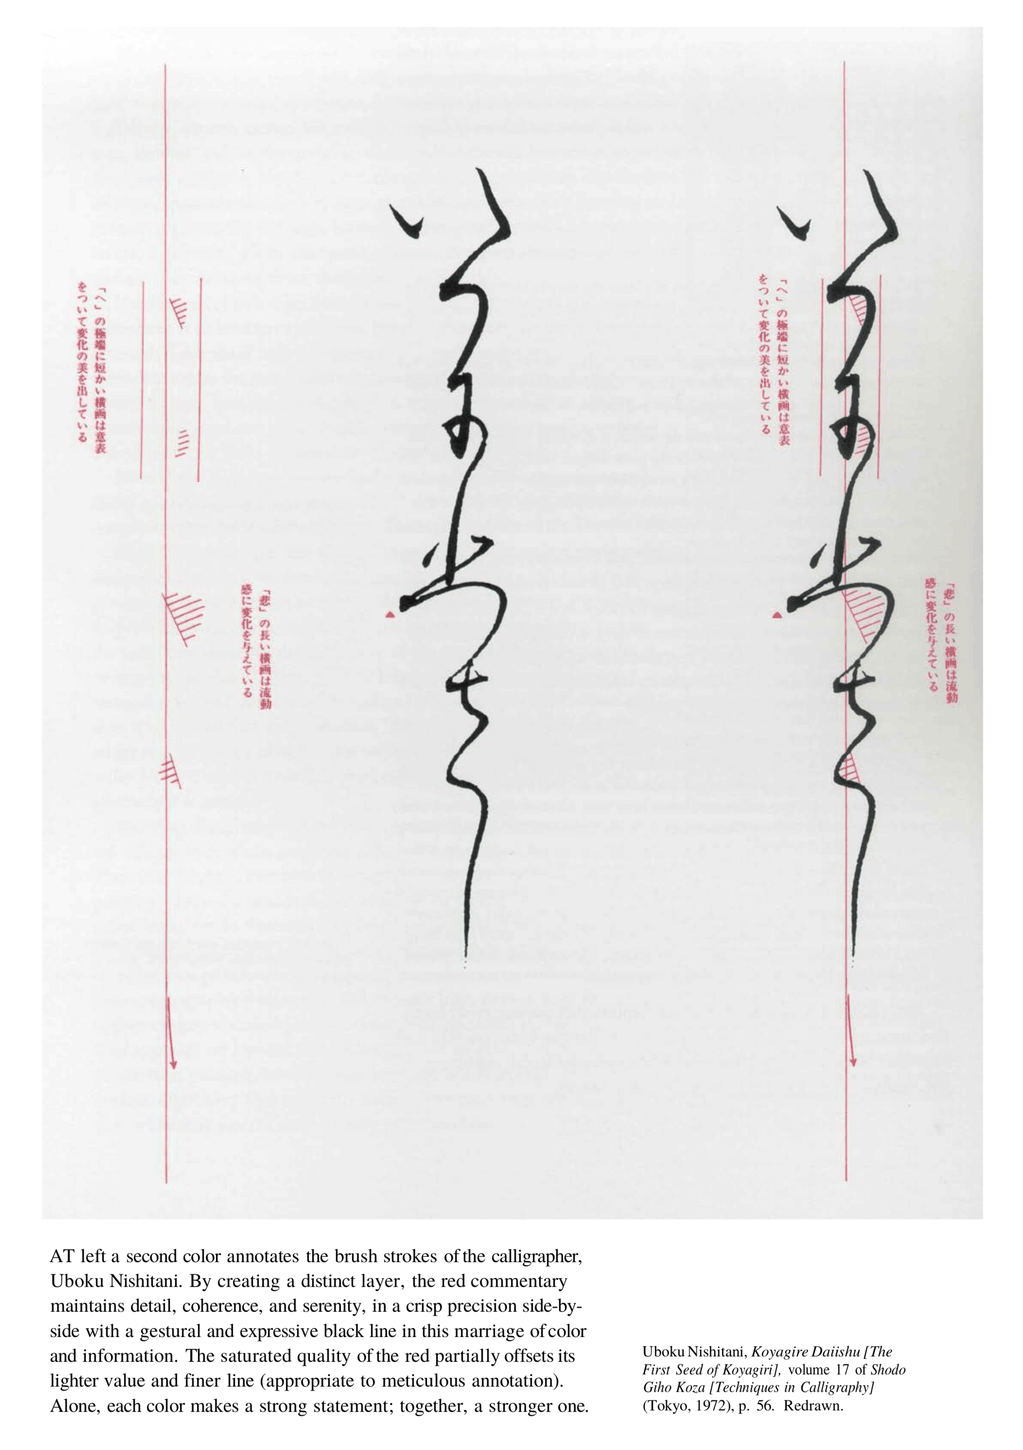 Japanese calligraphy with rubrication commentary, Uboku Nishitani 1972 (“The First Seed of Koyagiri”, v17 Techniques in Calligraphy); from pg54 of chapter 3, “Layering and Separation” of Envisioning Information, Tufte 1990